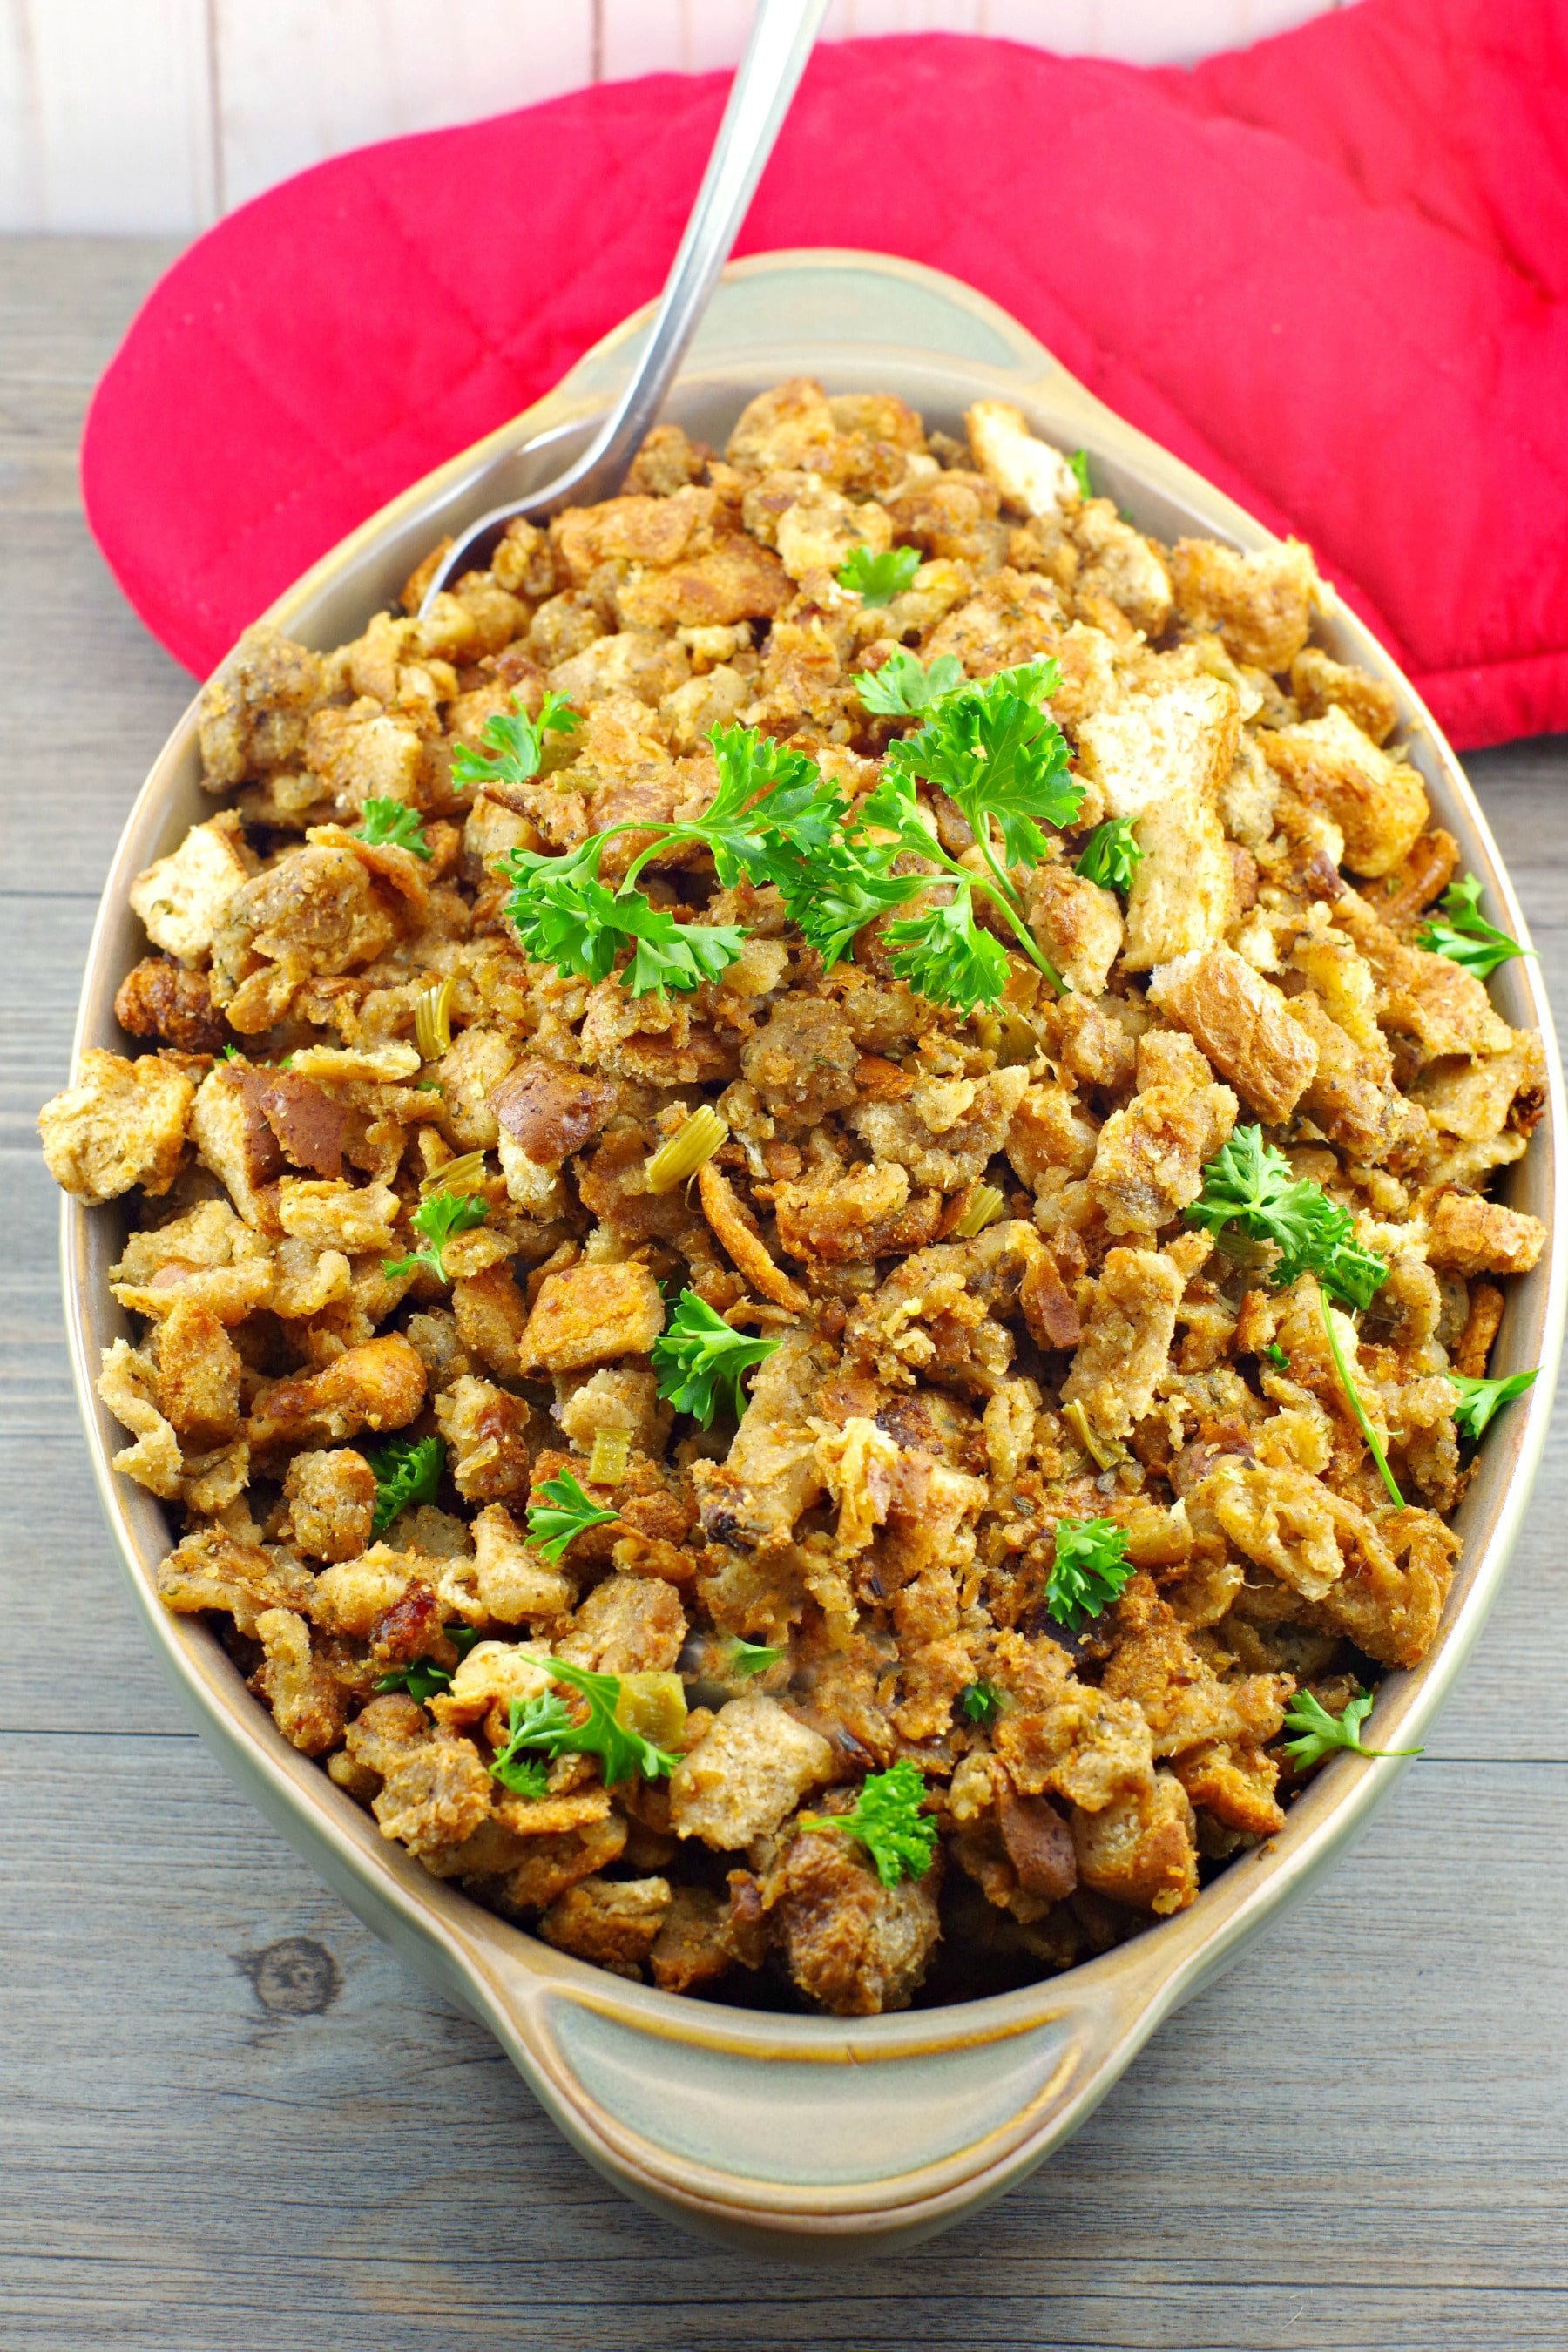 Old fashioned Savoury Bread Stuffing